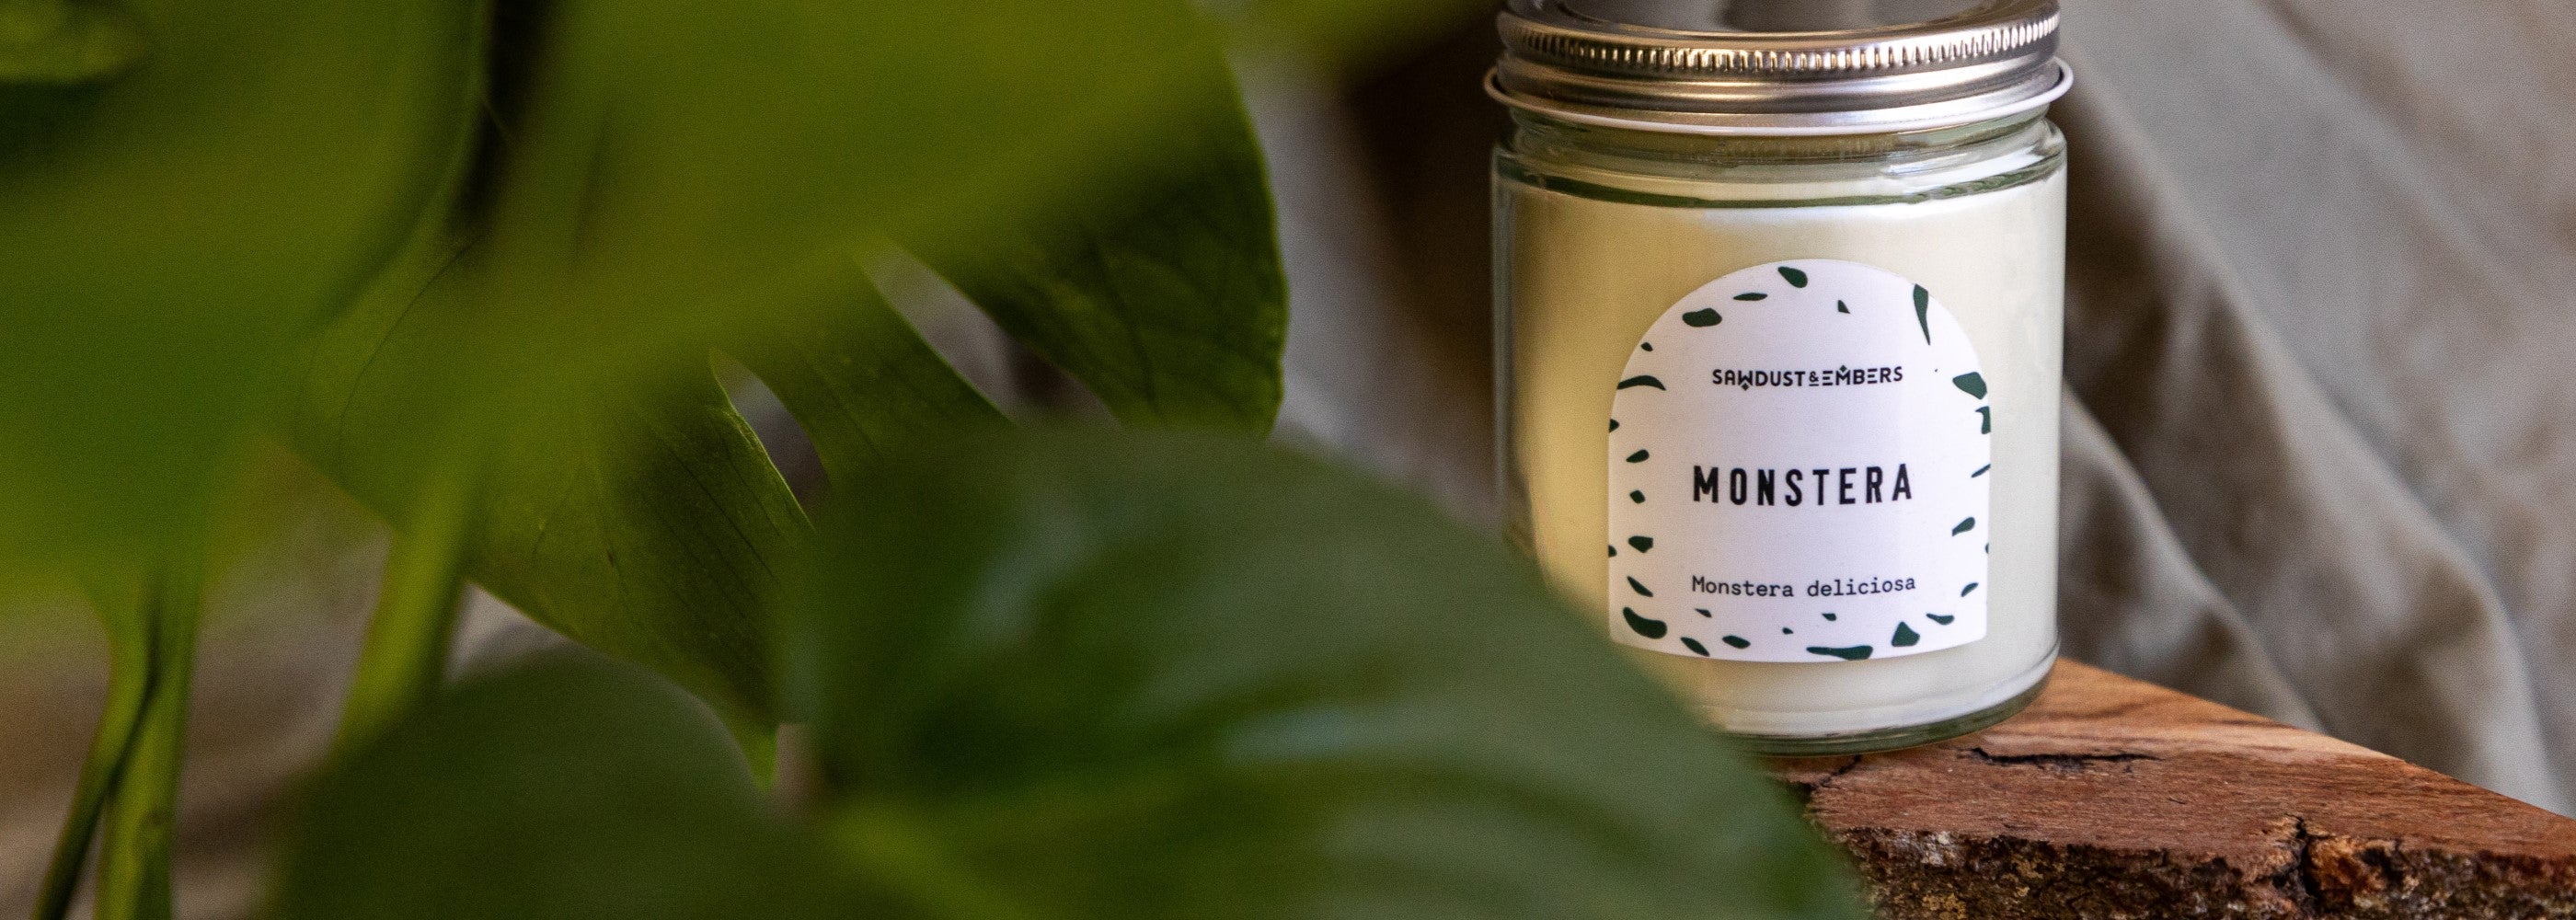 A small candle in a clear glass jar with a white label marked 'Monstera' placed among lush green leaves, emphasizing its natural and serene setting.